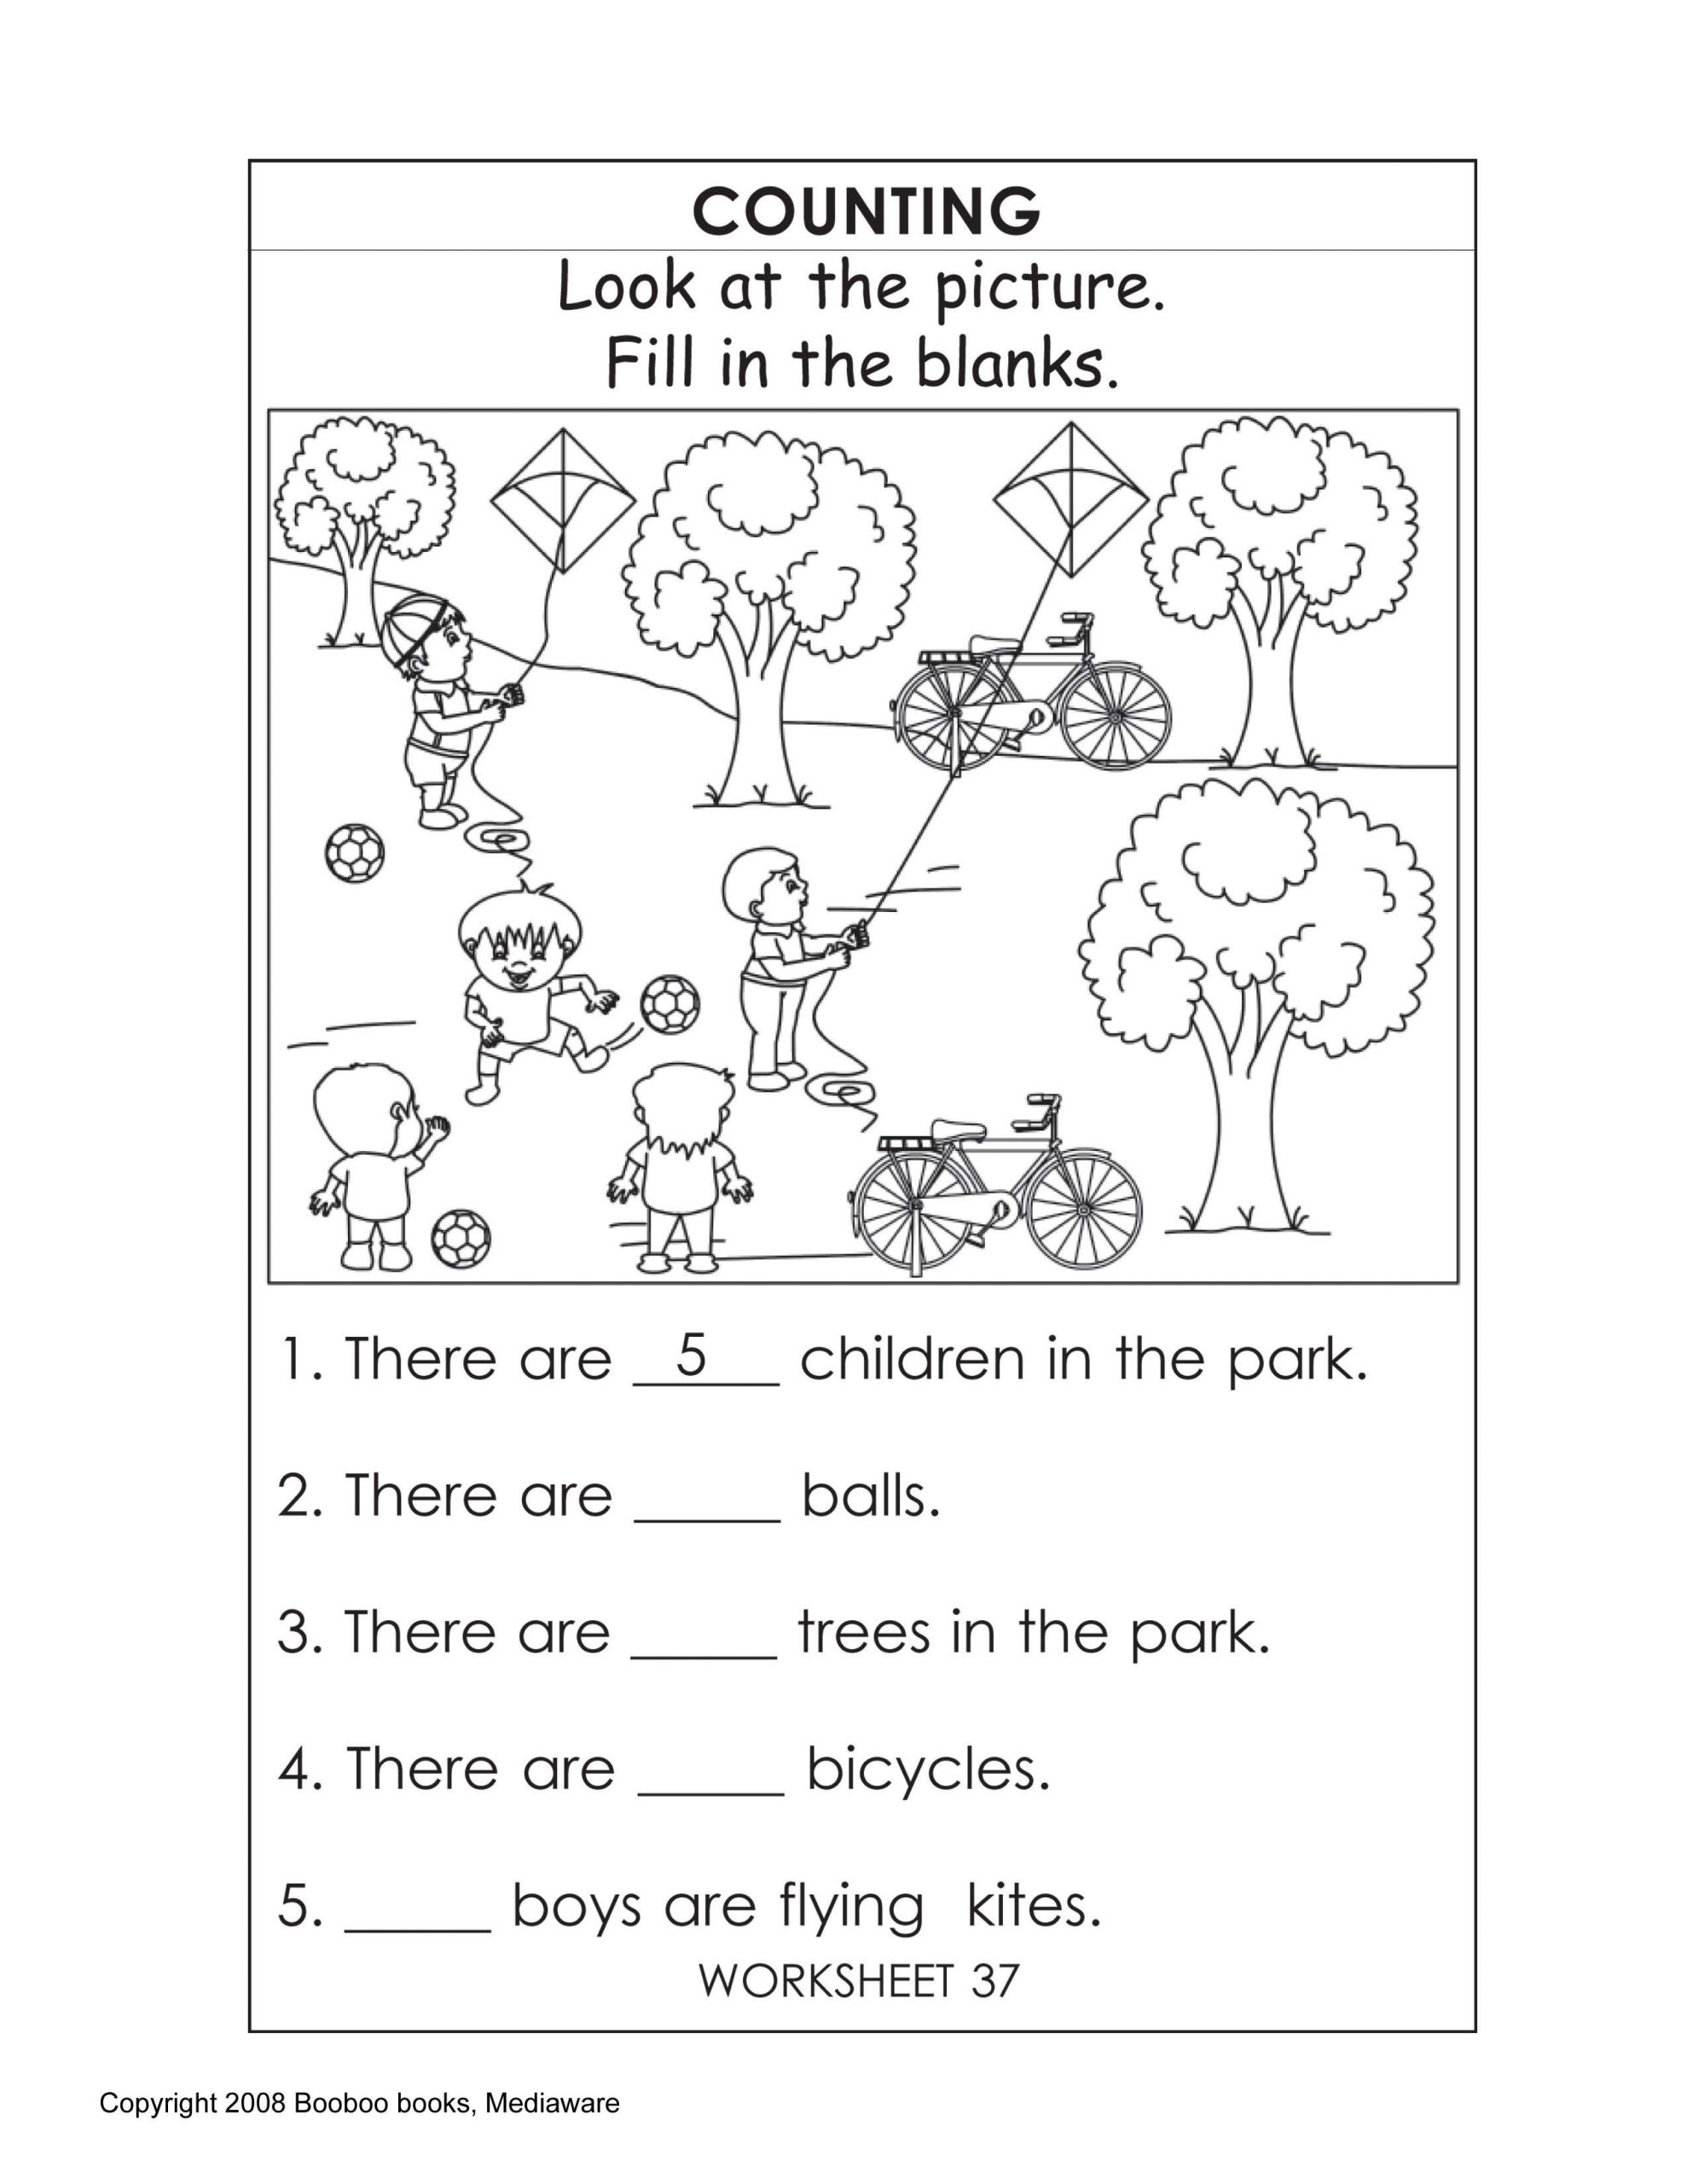 Vocabulary Worksheets Fifth Grade 5